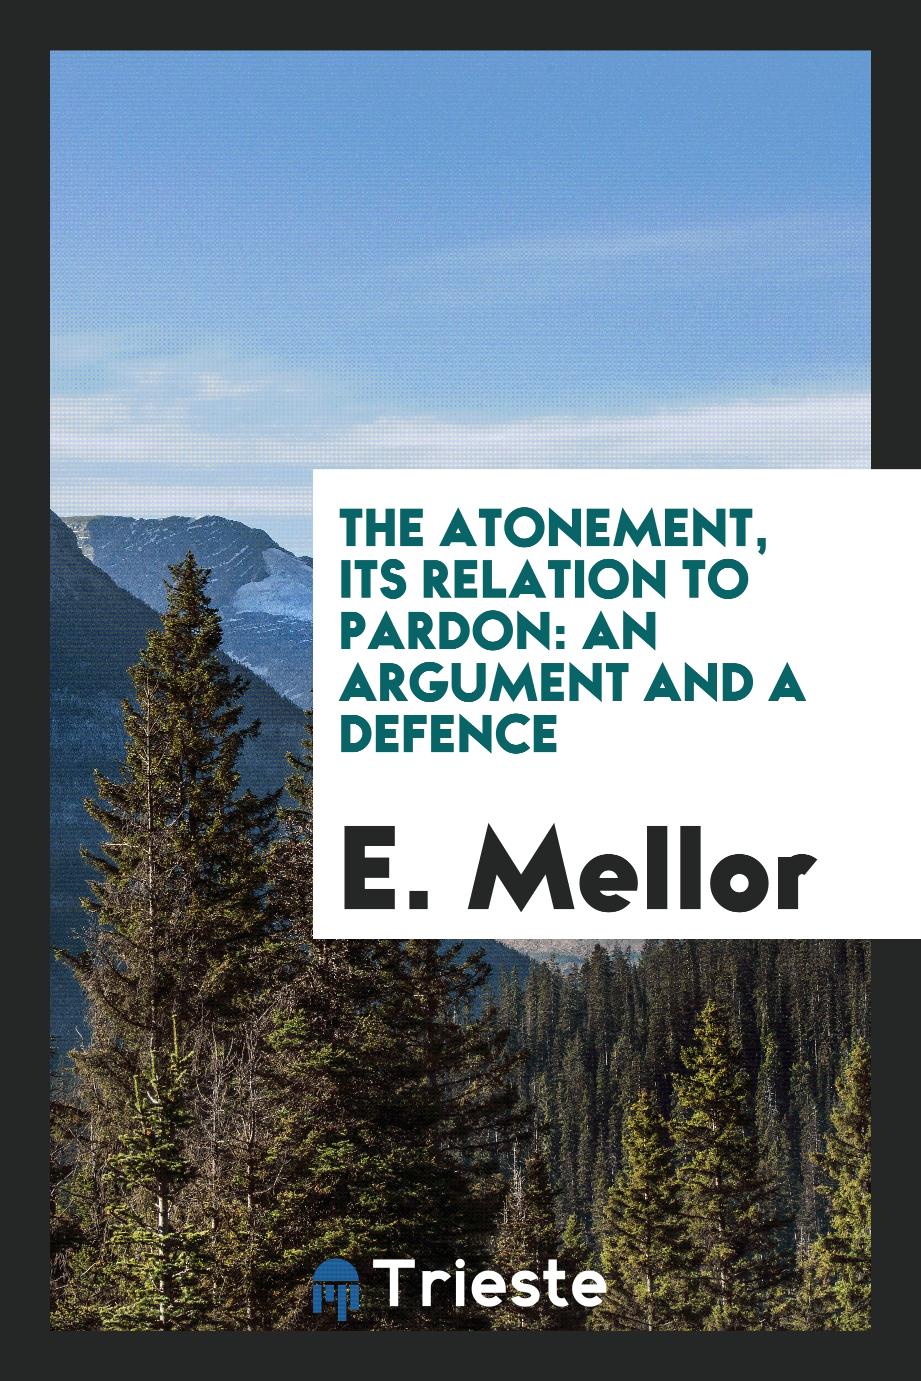 The Atonement, Its Relation to Pardon: An Argument and a Defence